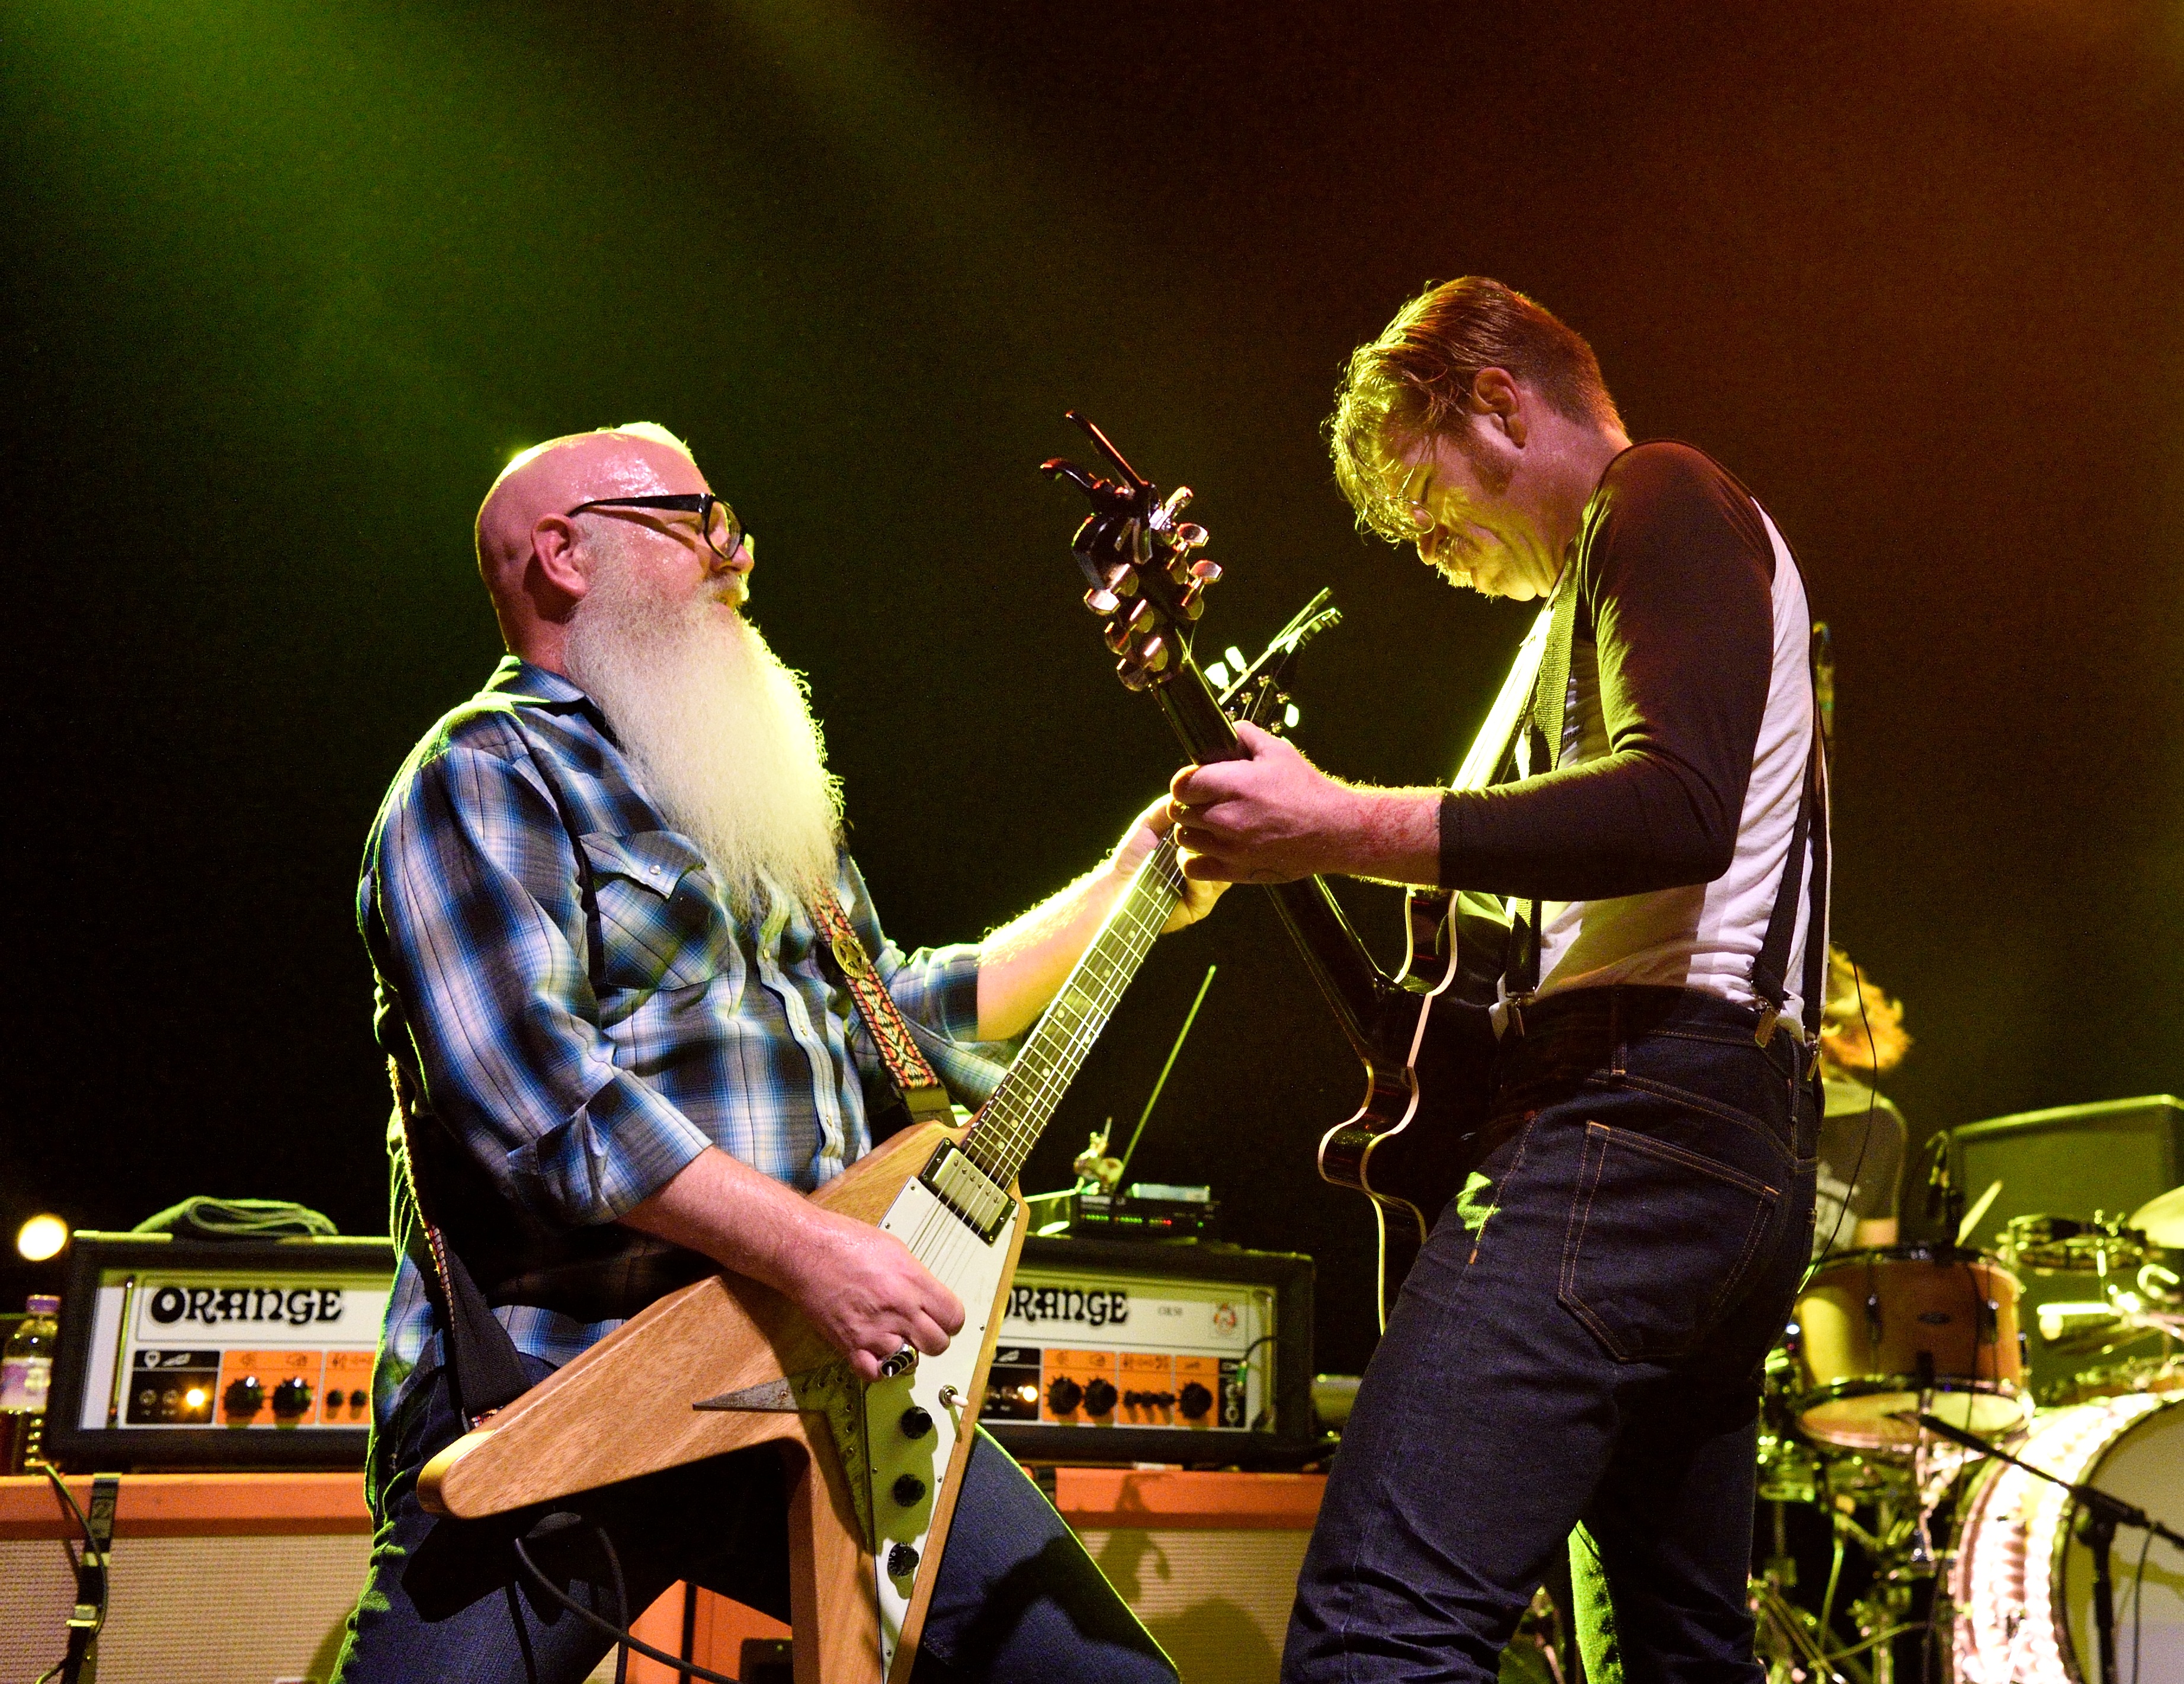 Eagles Of Death Metal Perform At The Forum In London